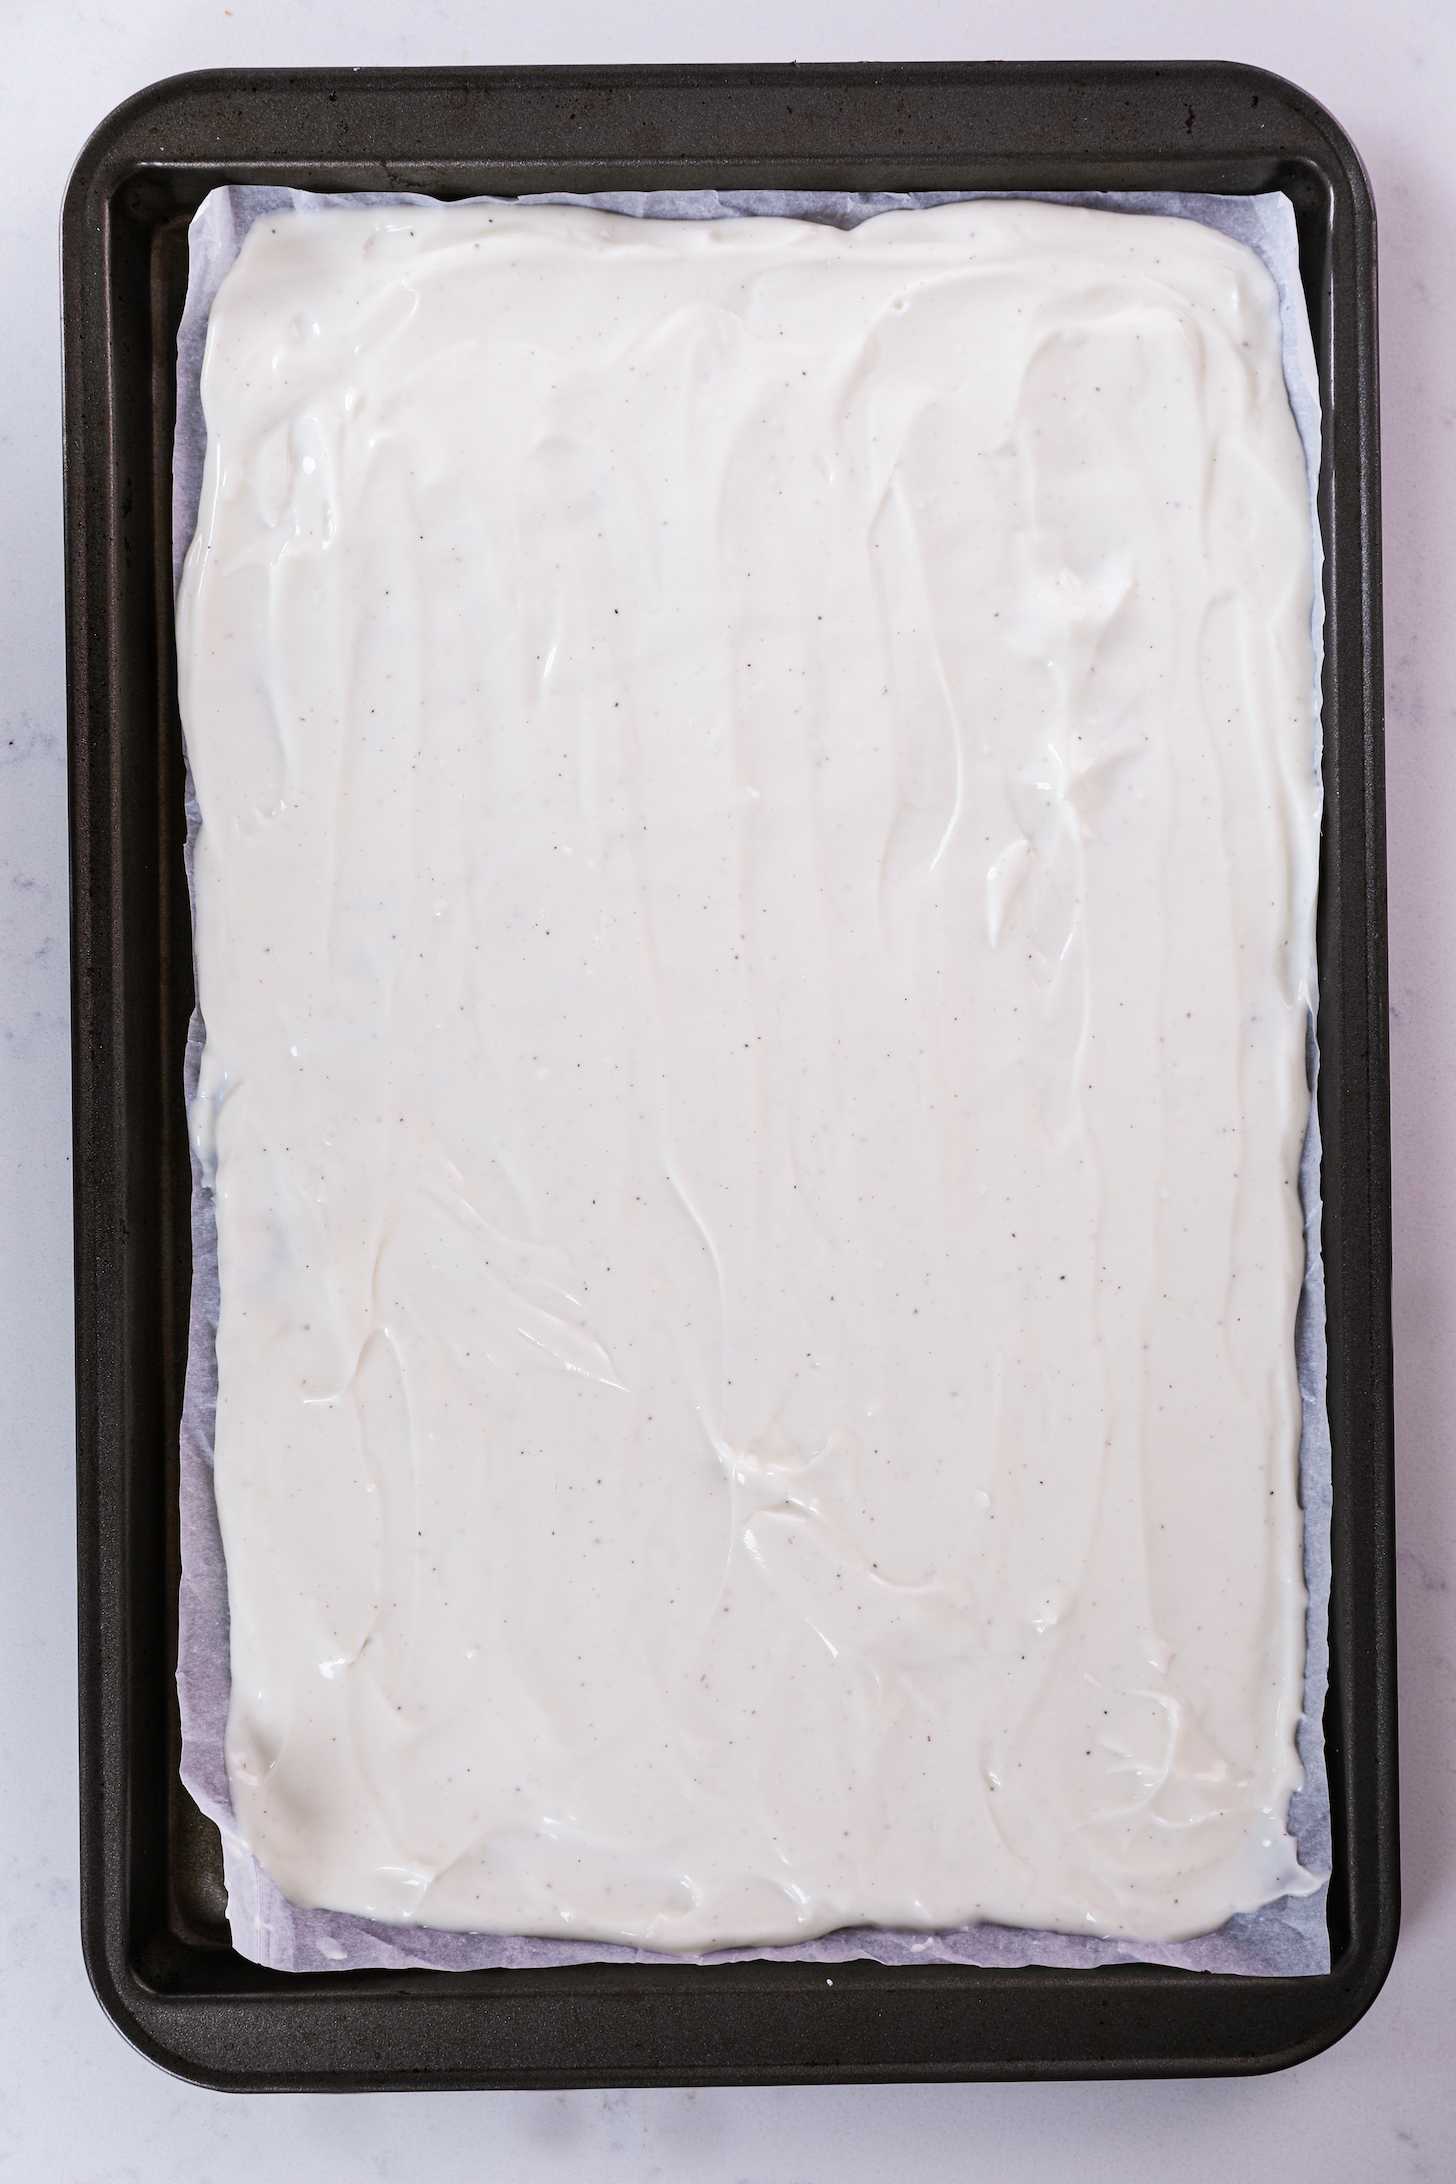 A smooth layer of frozen yogurt on a tray with raised edges and parchment paper lining.